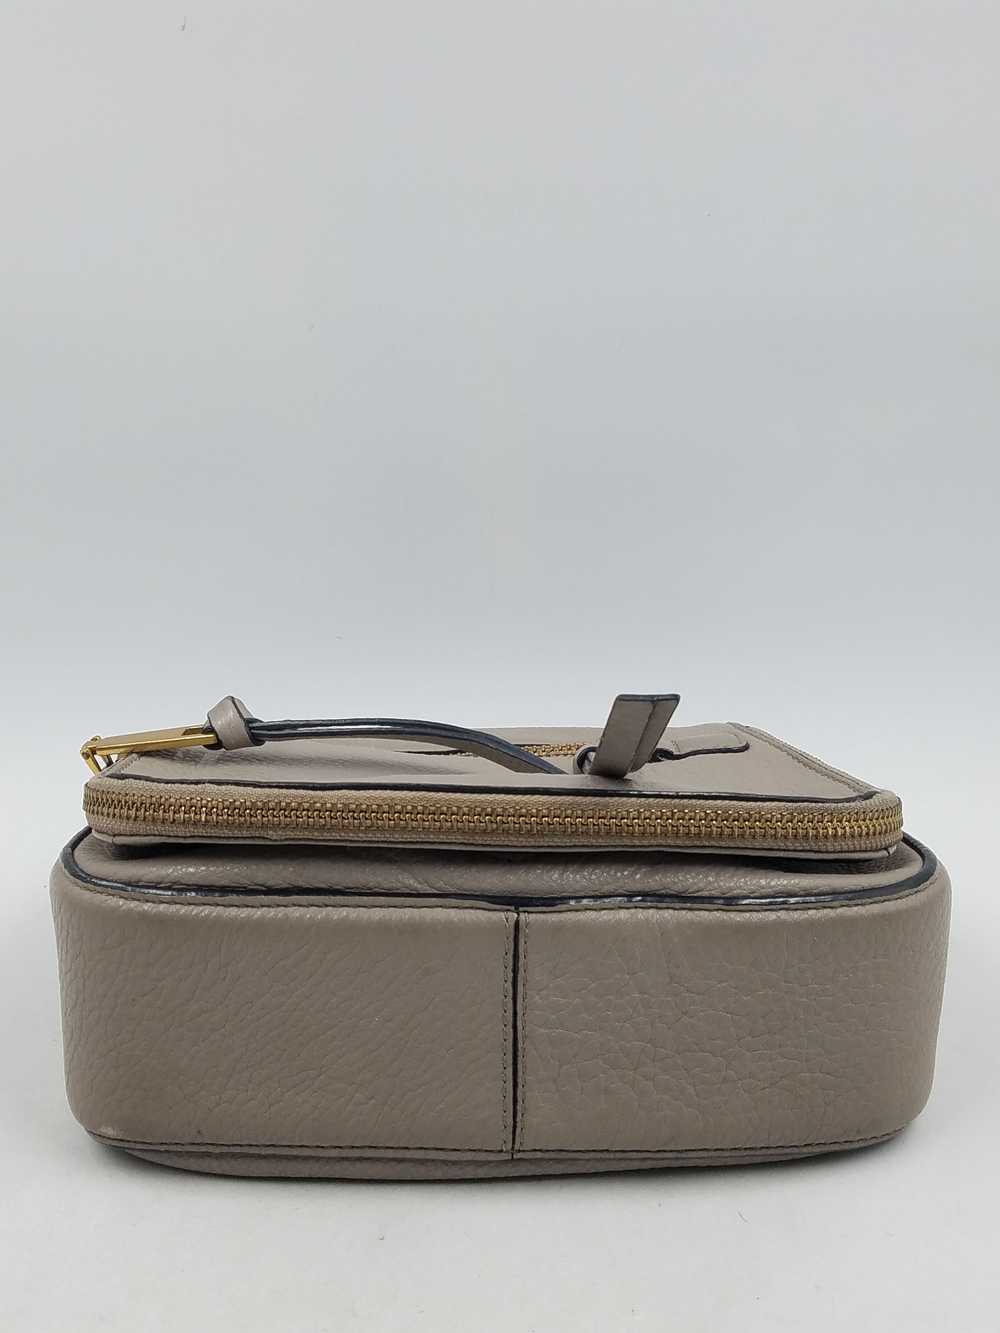 Authentic Marc Jacobs Taupe Saddle Bag - image 4